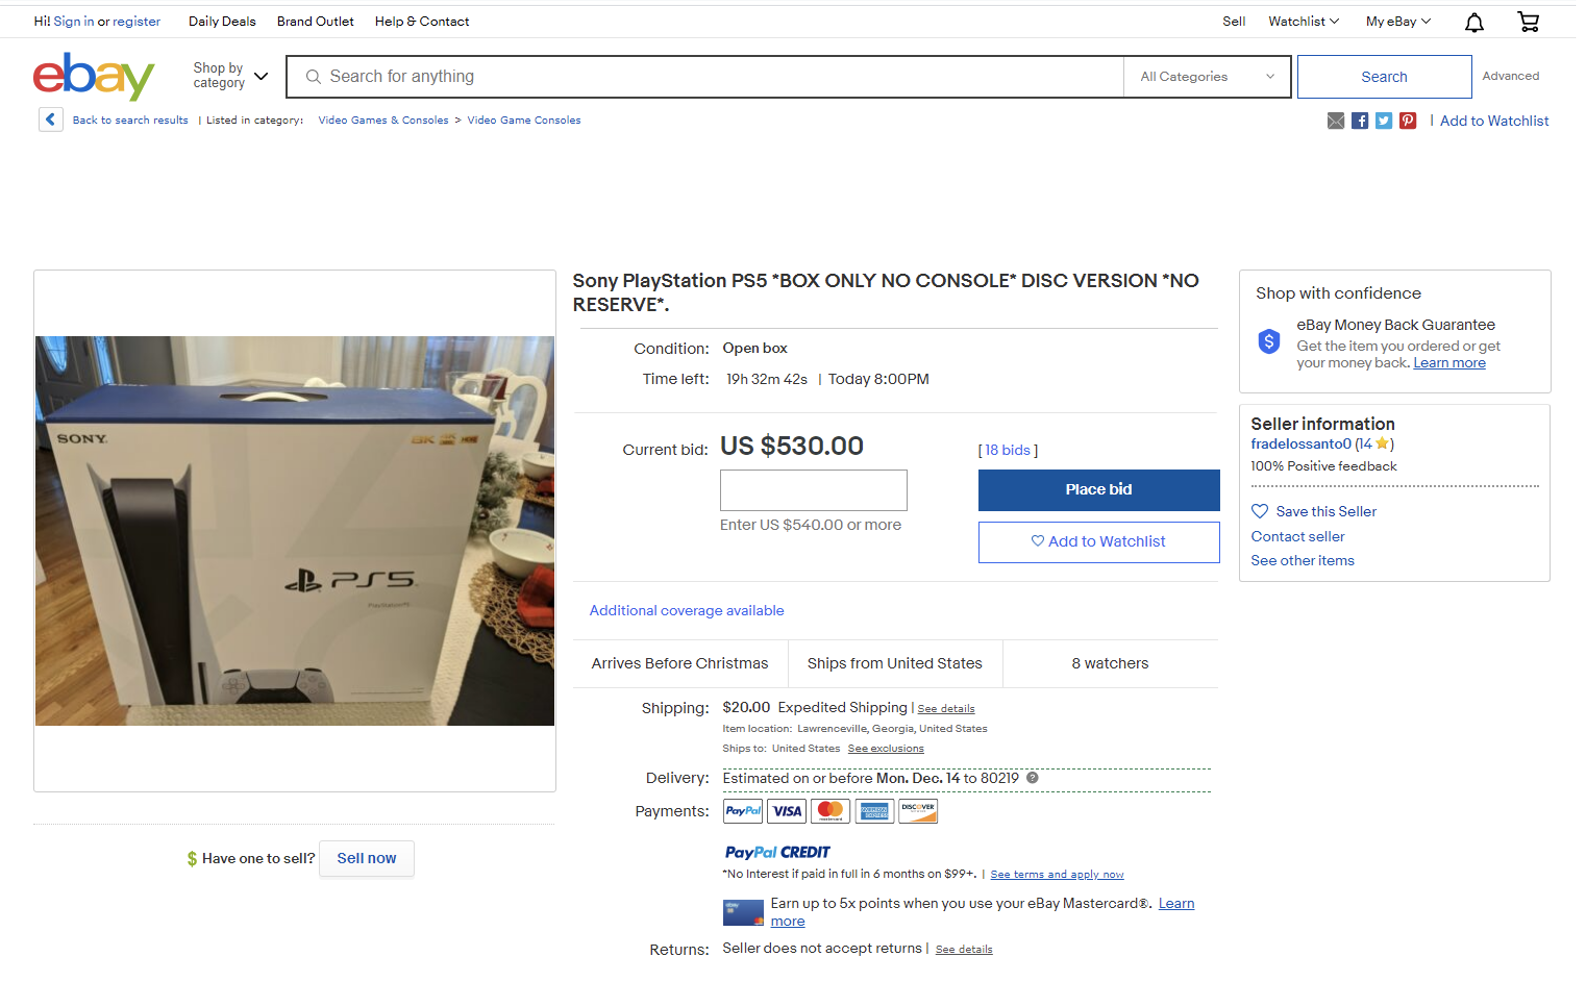 PS5 box listed as a product on eBay